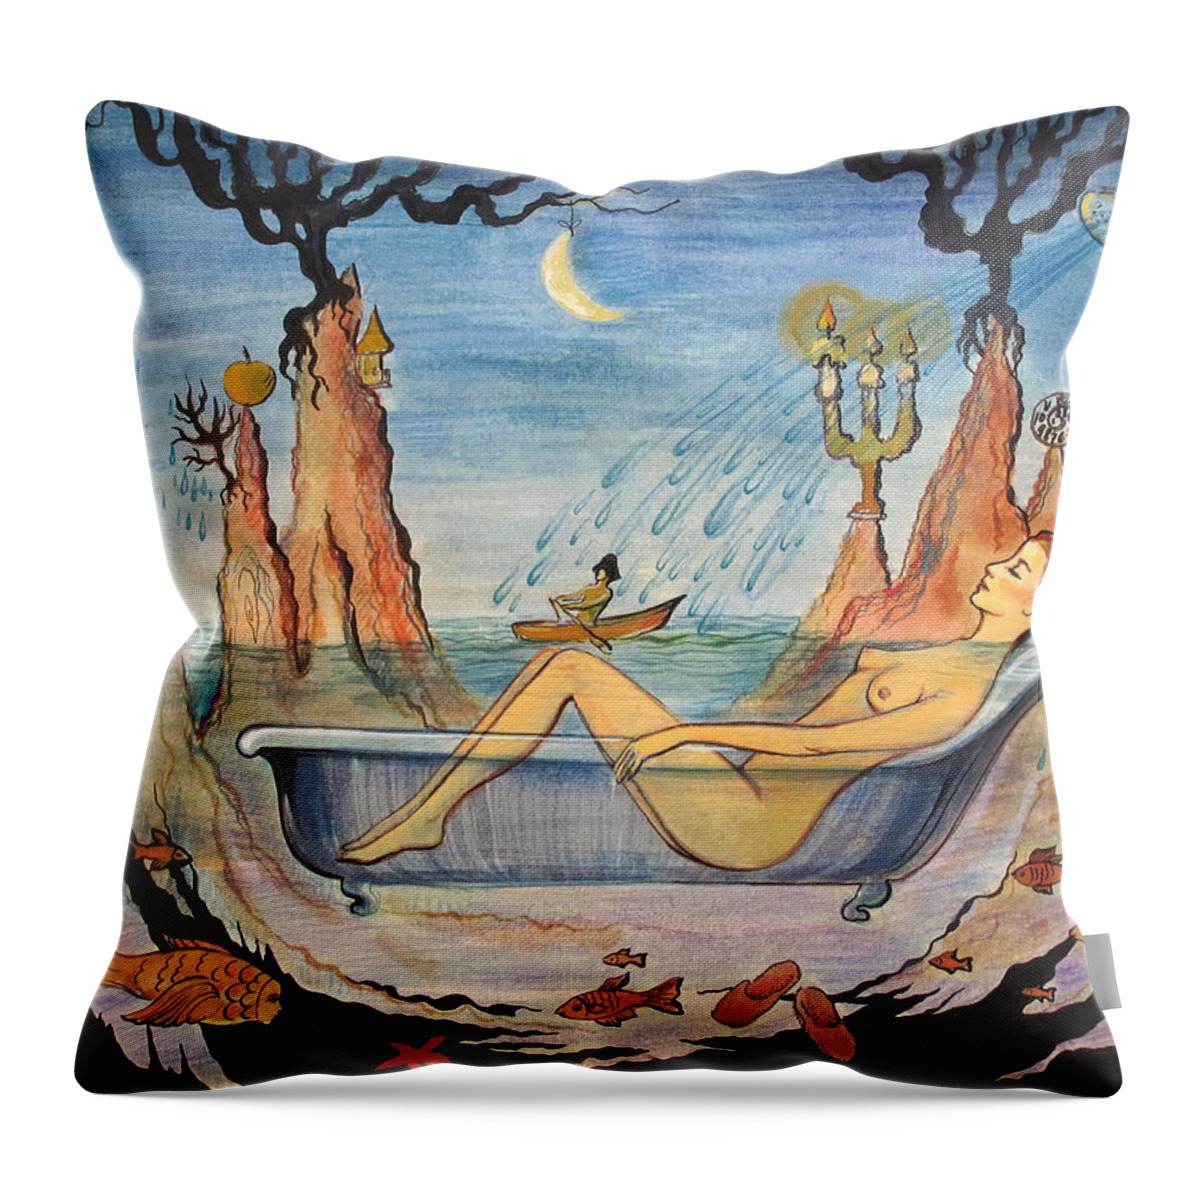 Woman Throw Pillow featuring the painting My dream by Valentina Plishchina